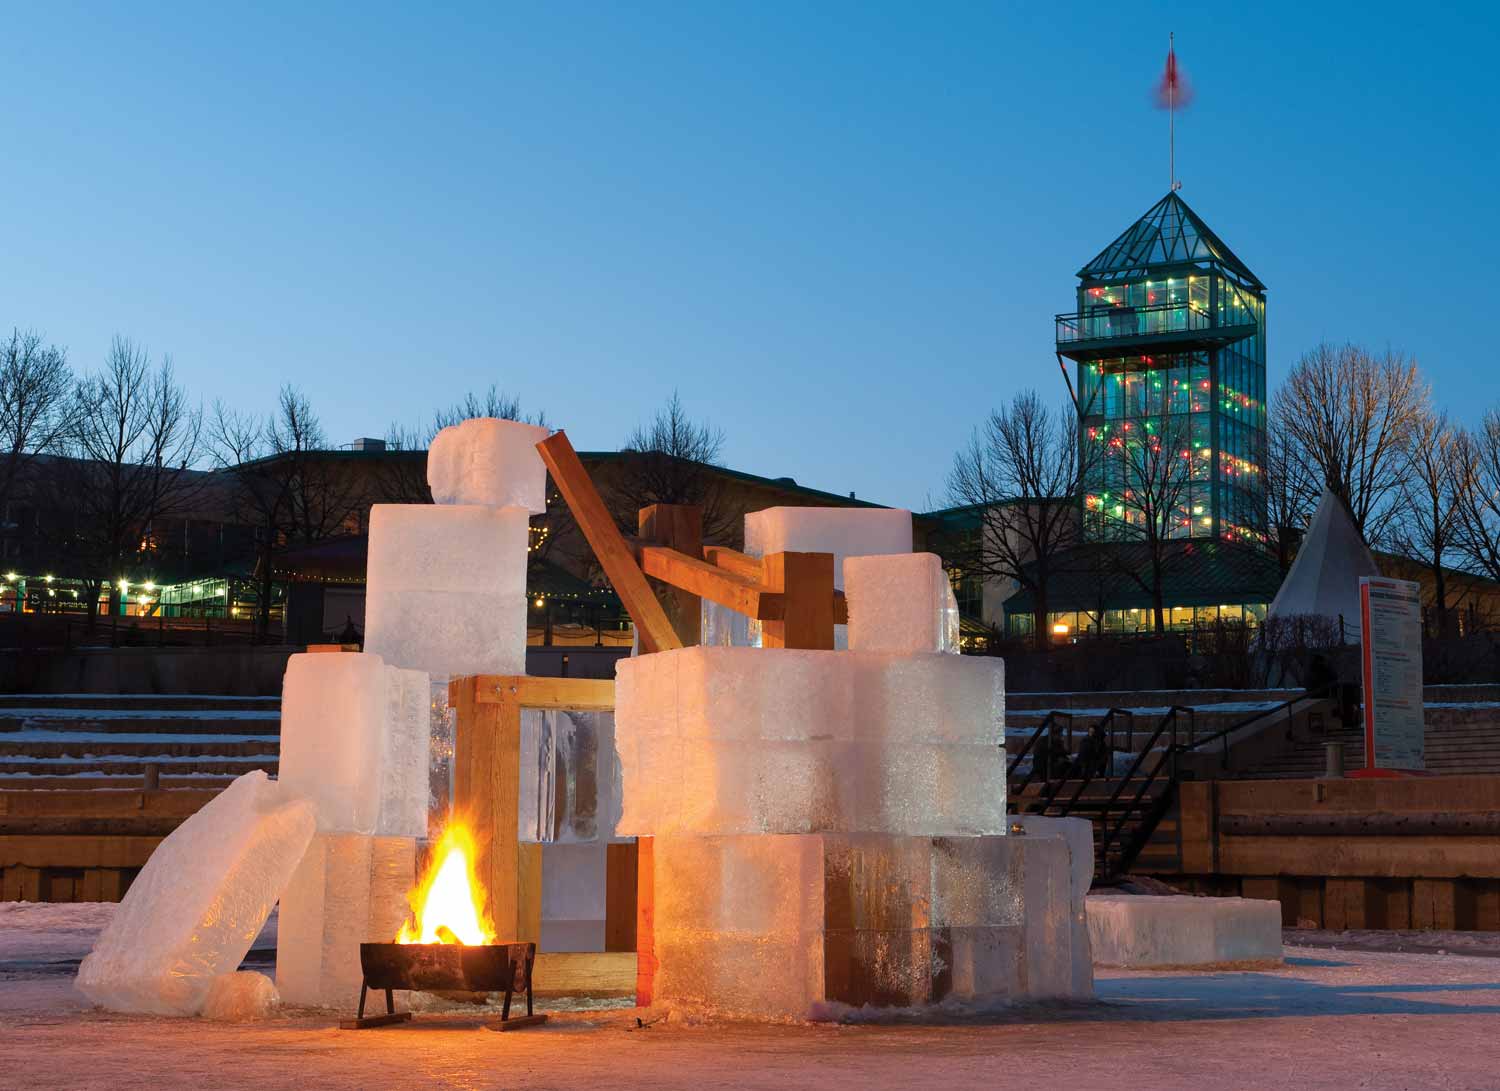 At dusk, a fire burns in a fire pit next to a structure built of large cubes of ice and blocks of wood. The Forks Market Tower is in the background.